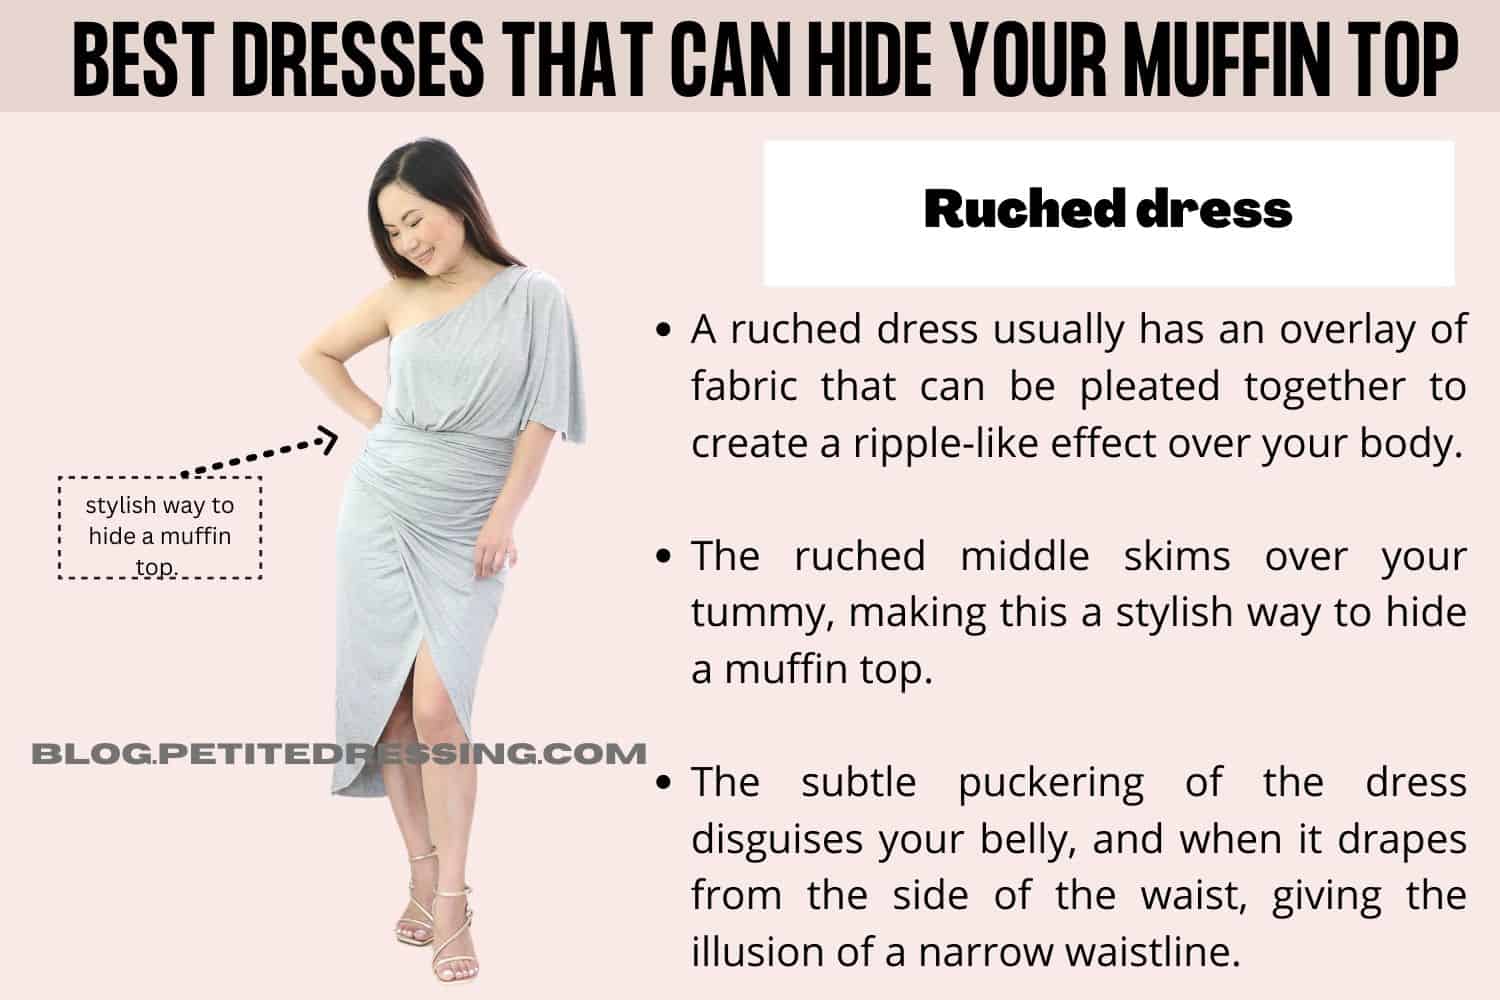 9 Types of Dresses that can Hide a Muffin Top